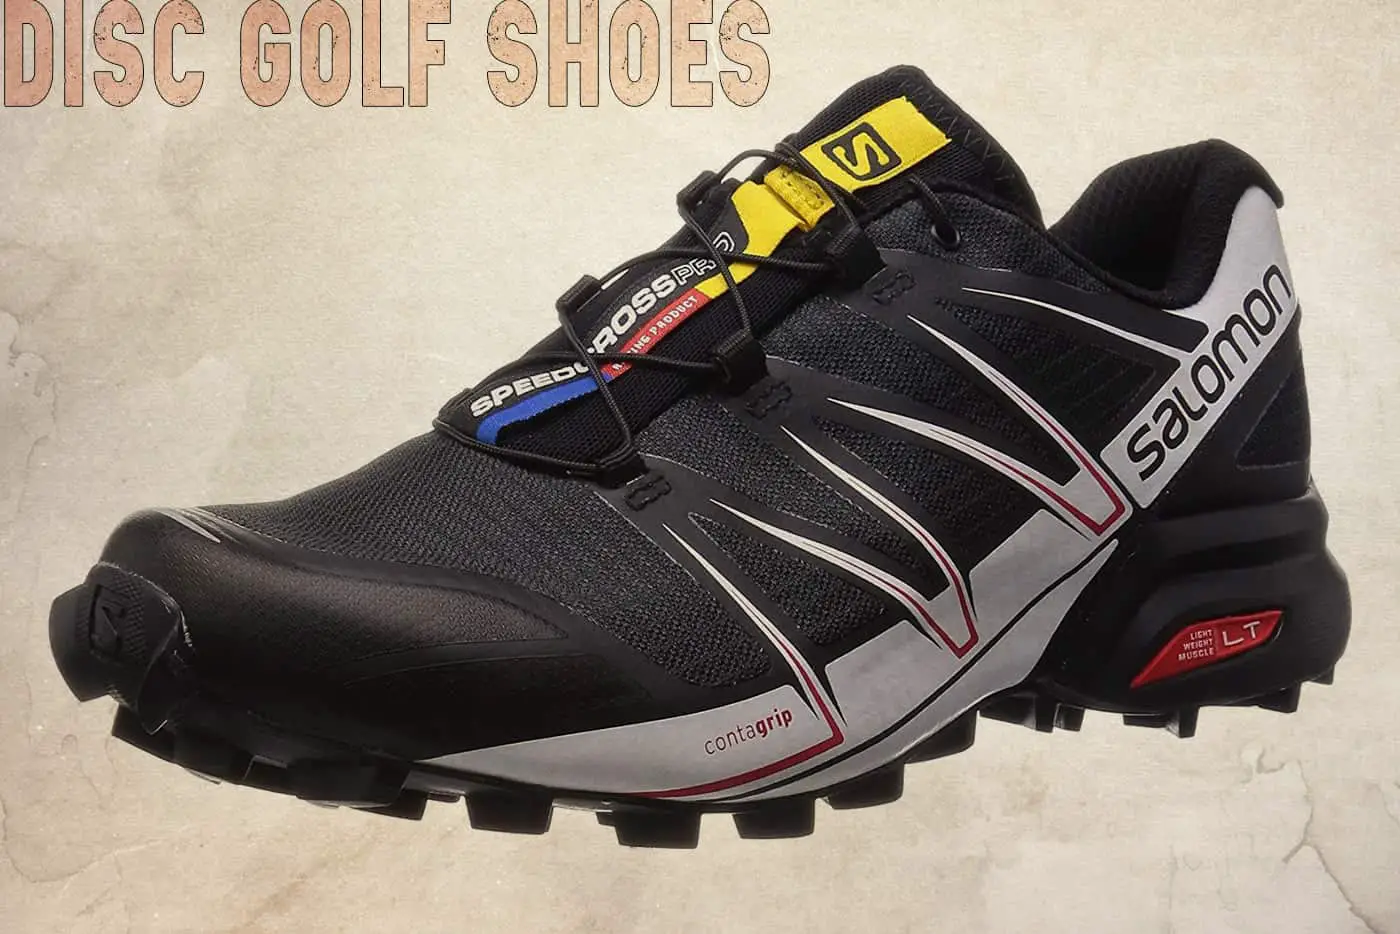 Disc Golf Shoes 2021 